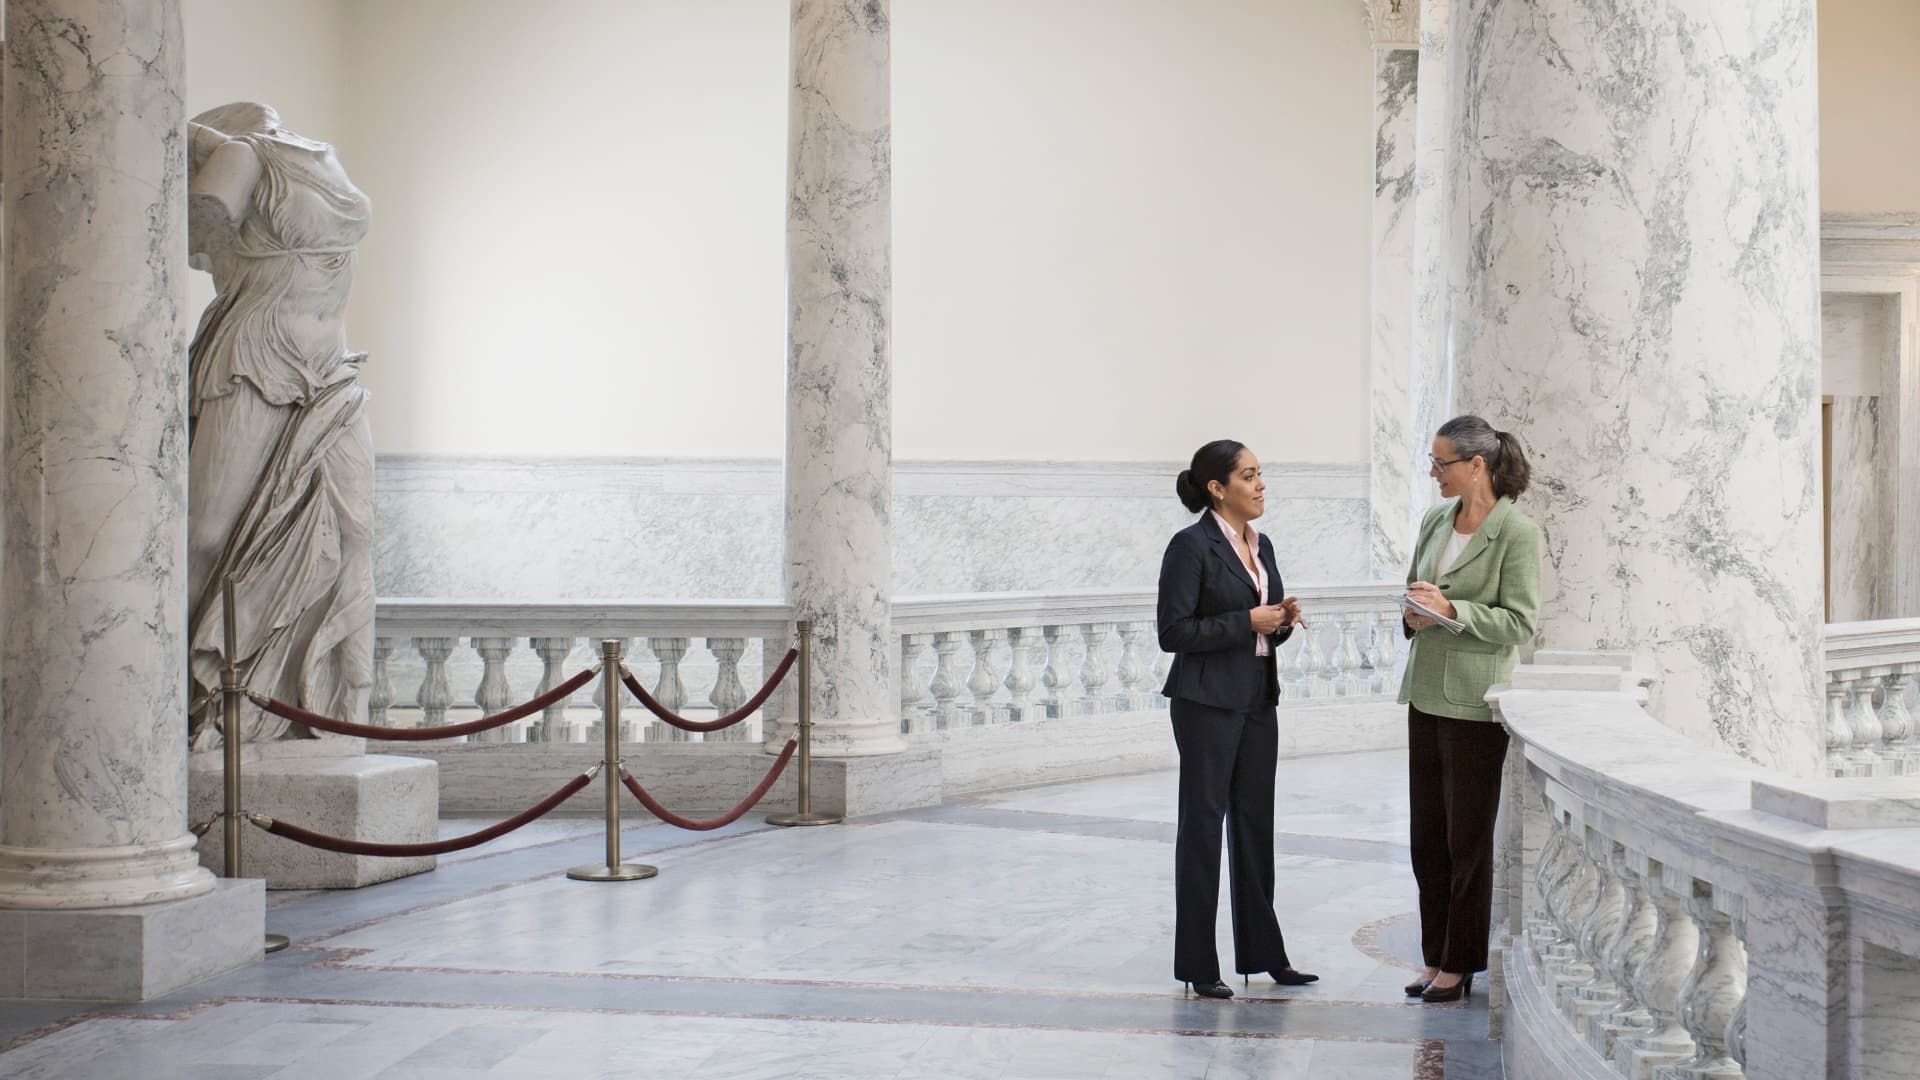 Two women speaking to each other in a U.S. Capitol building.